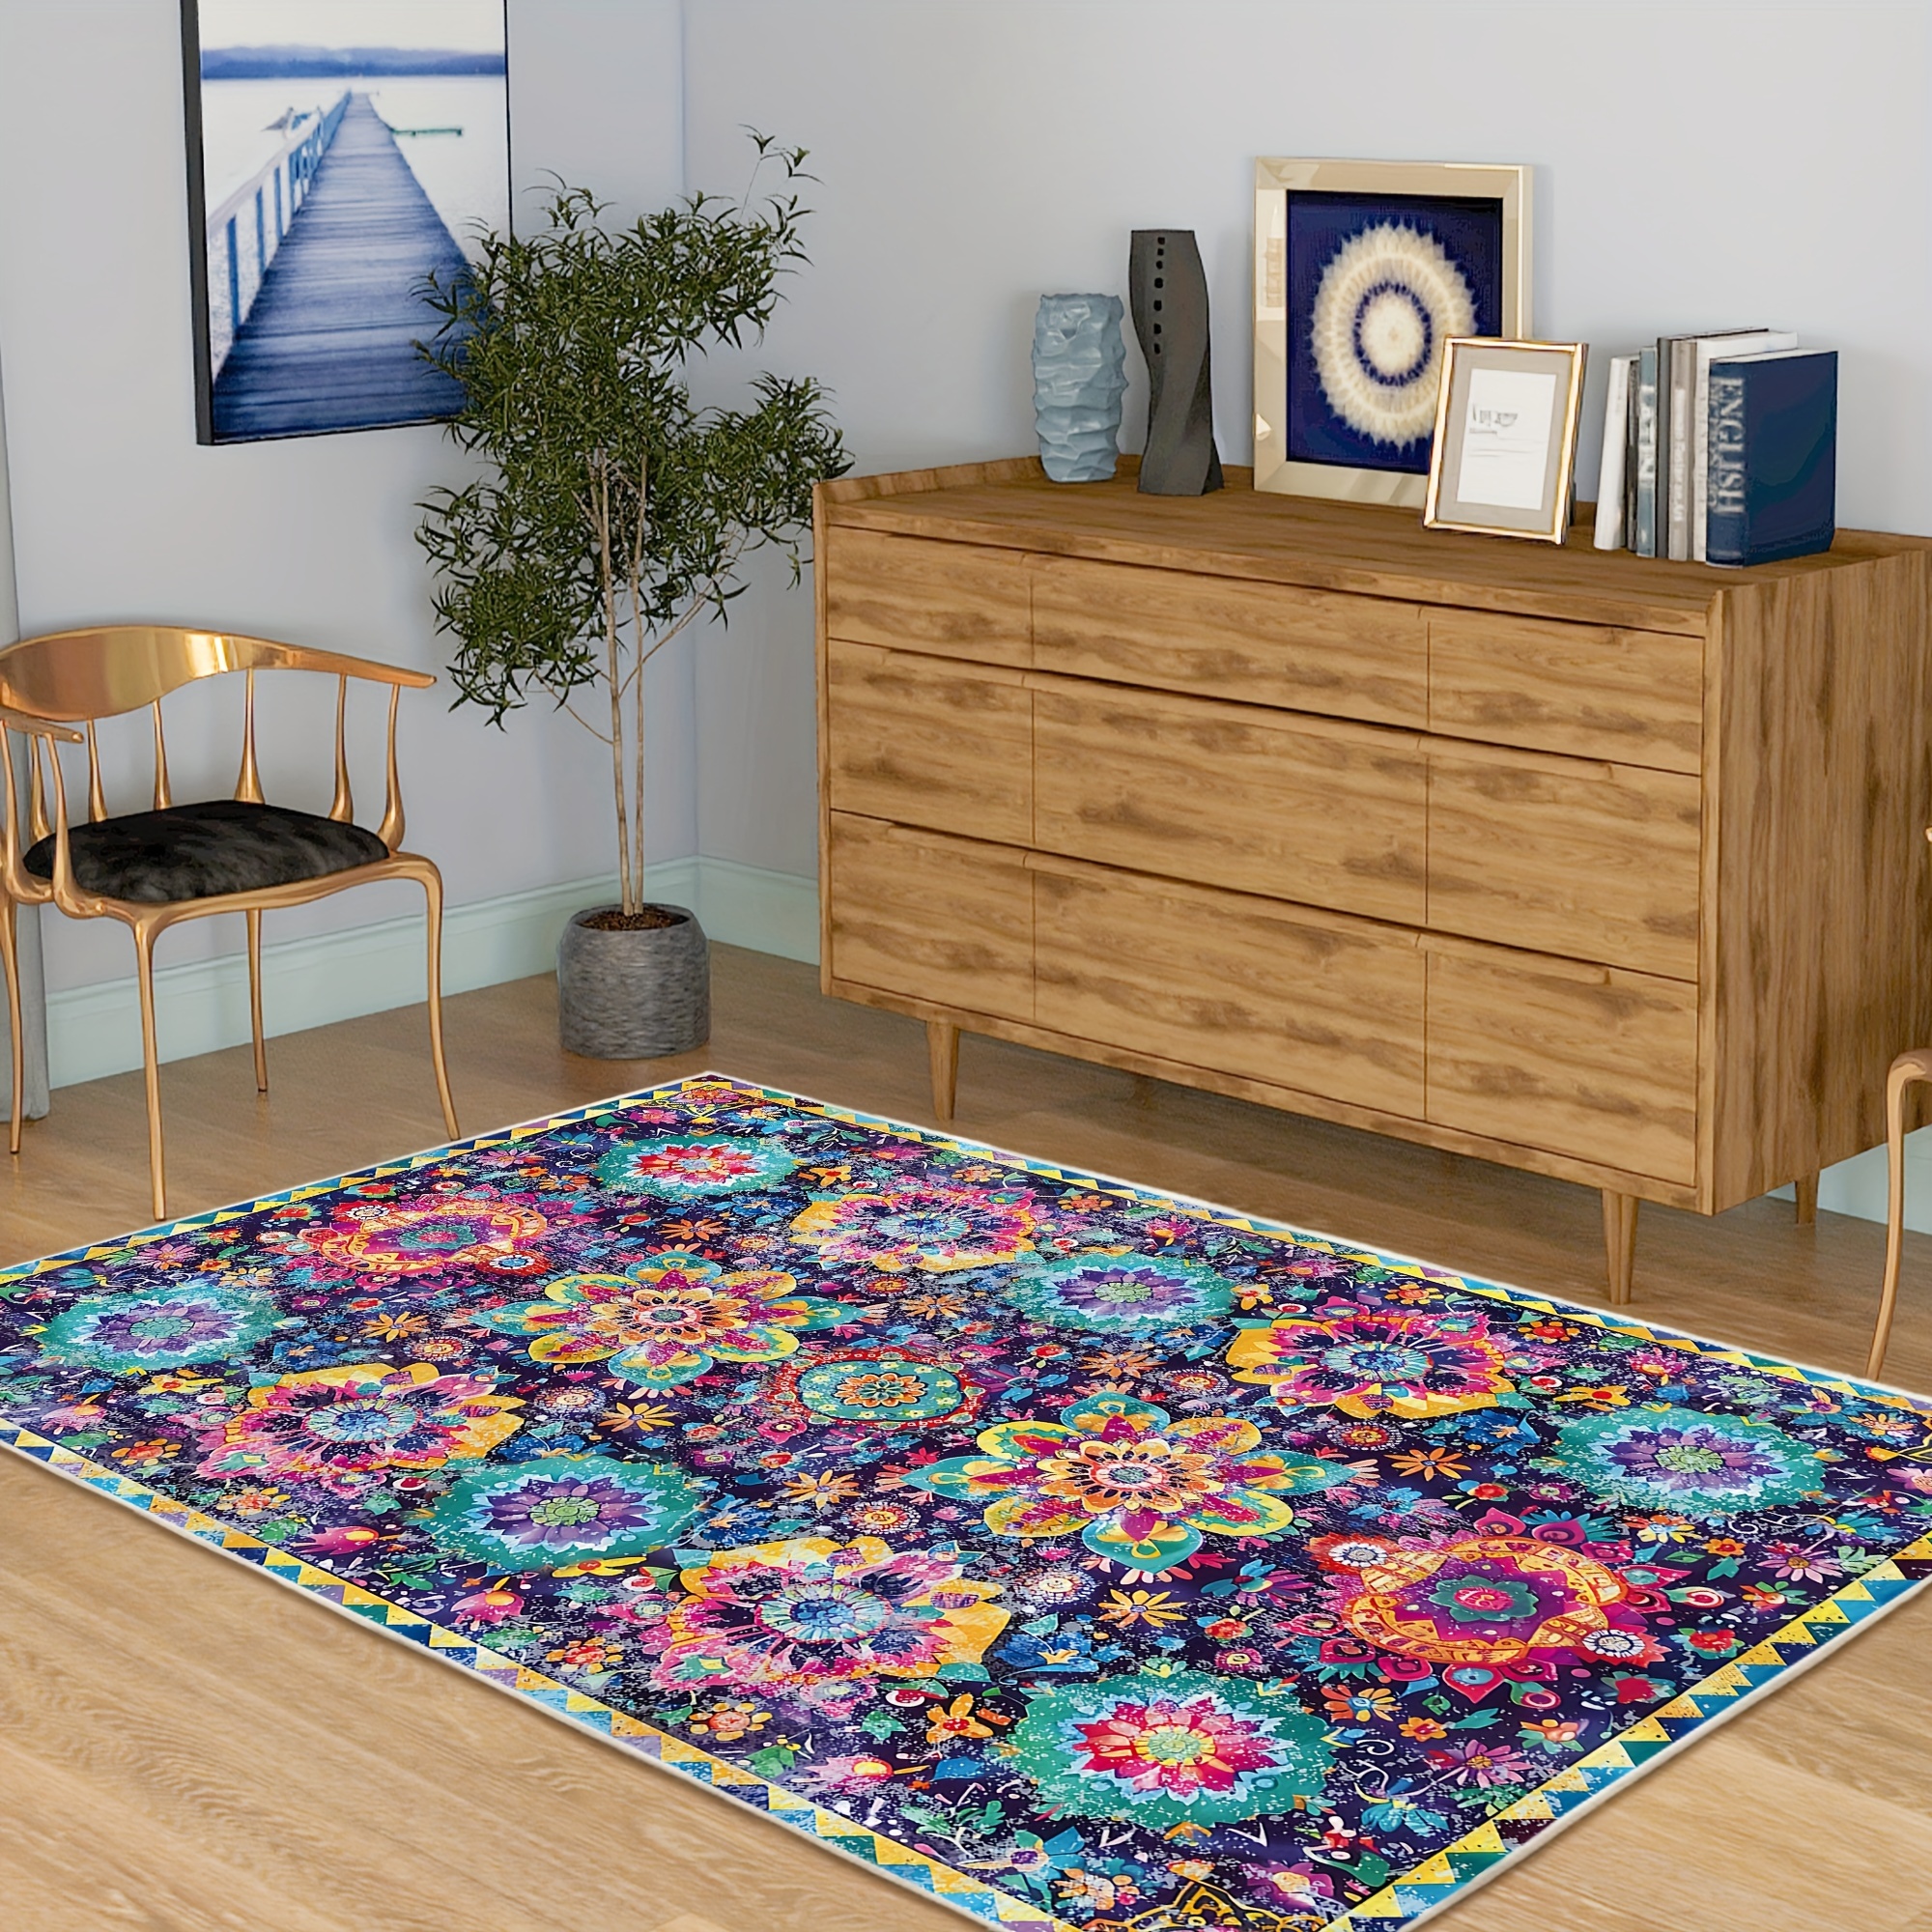 

Bohemian Vintage Floral Tufted Area Rug - Machine Washable, Non-slip, Lightweight Polyester Floor Mat, Low Pile, Pvc Backing, Ideal For Bedroom, Entryway, Office - Ethnic Persian-inspired Design, 1pc